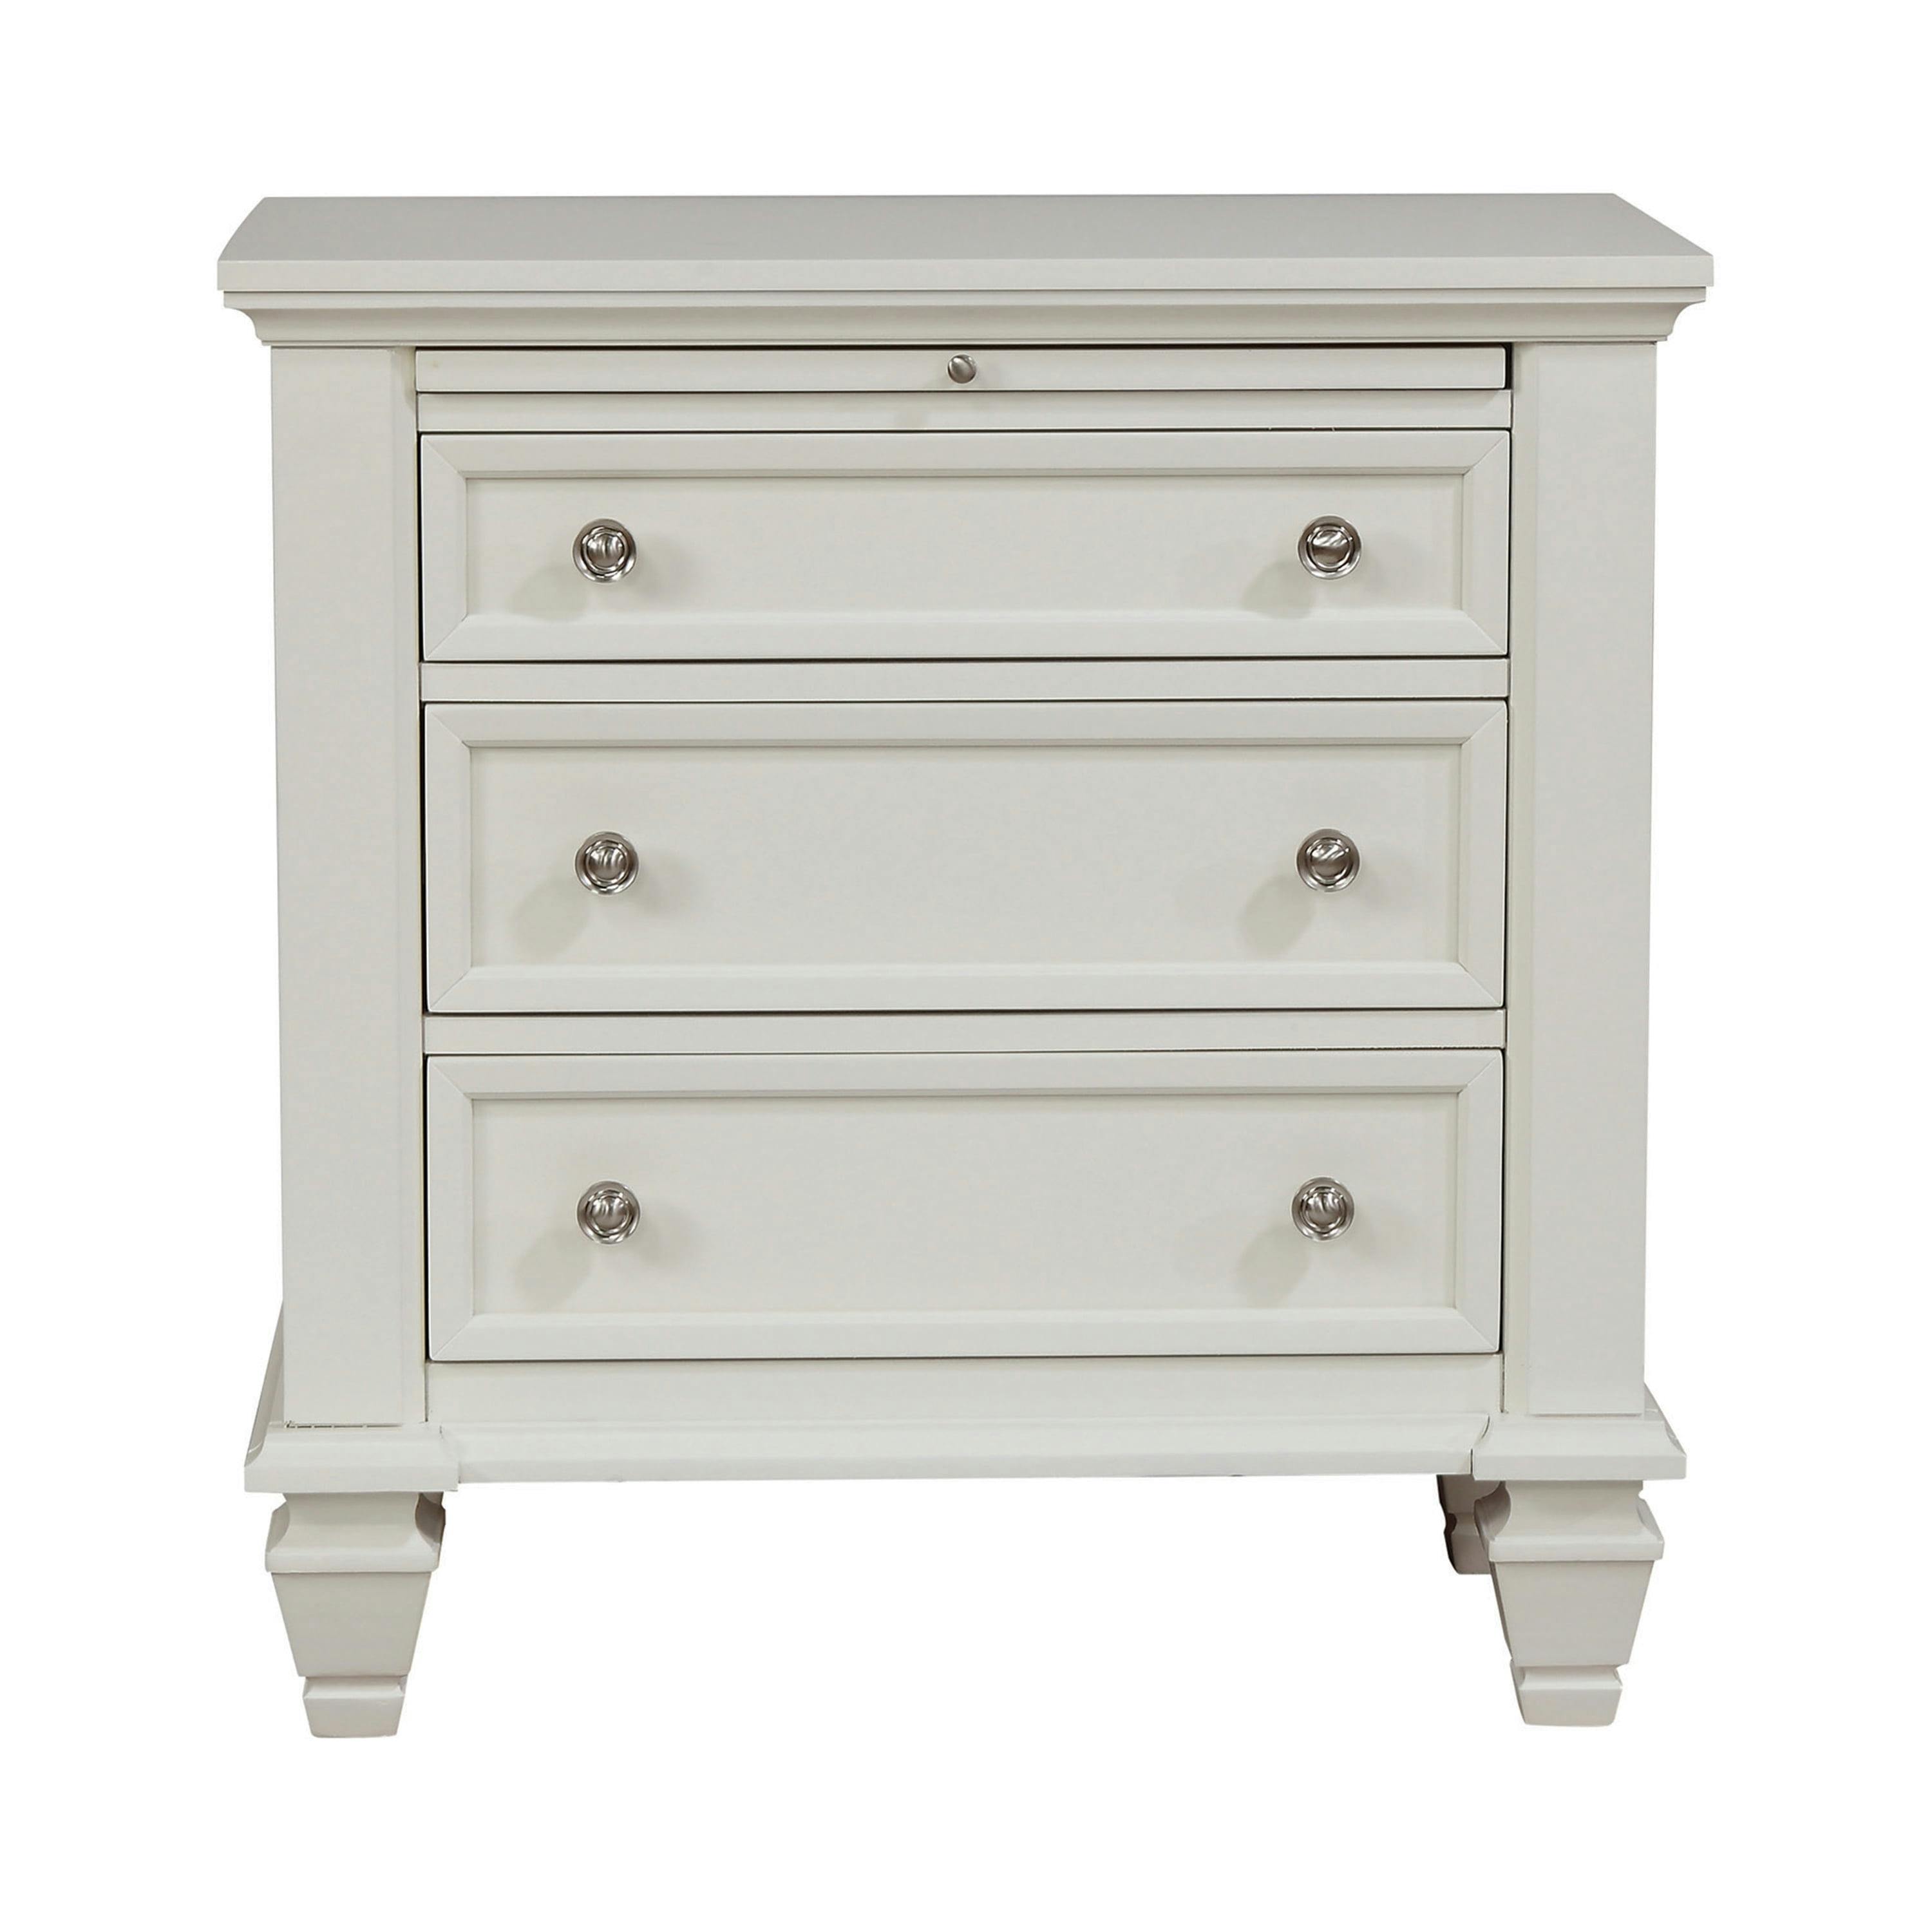 Coastal White Transitional 3-Drawer Nightstand with Pull-Out Tray